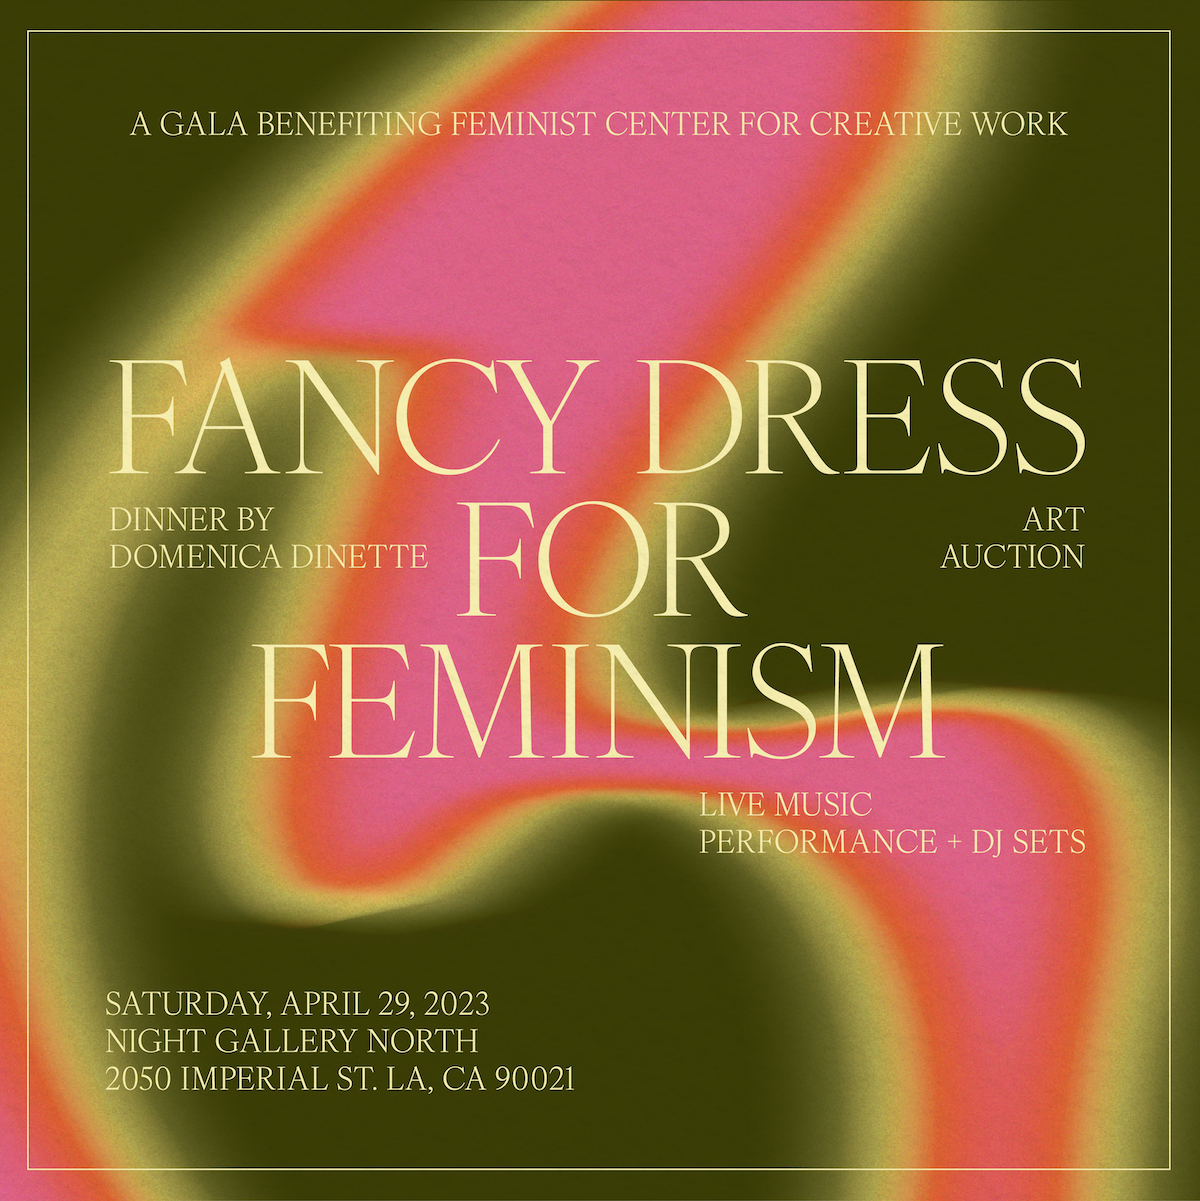 Fancy Dress for Feminism: A gala benefiting Feminist Center for Creative Work